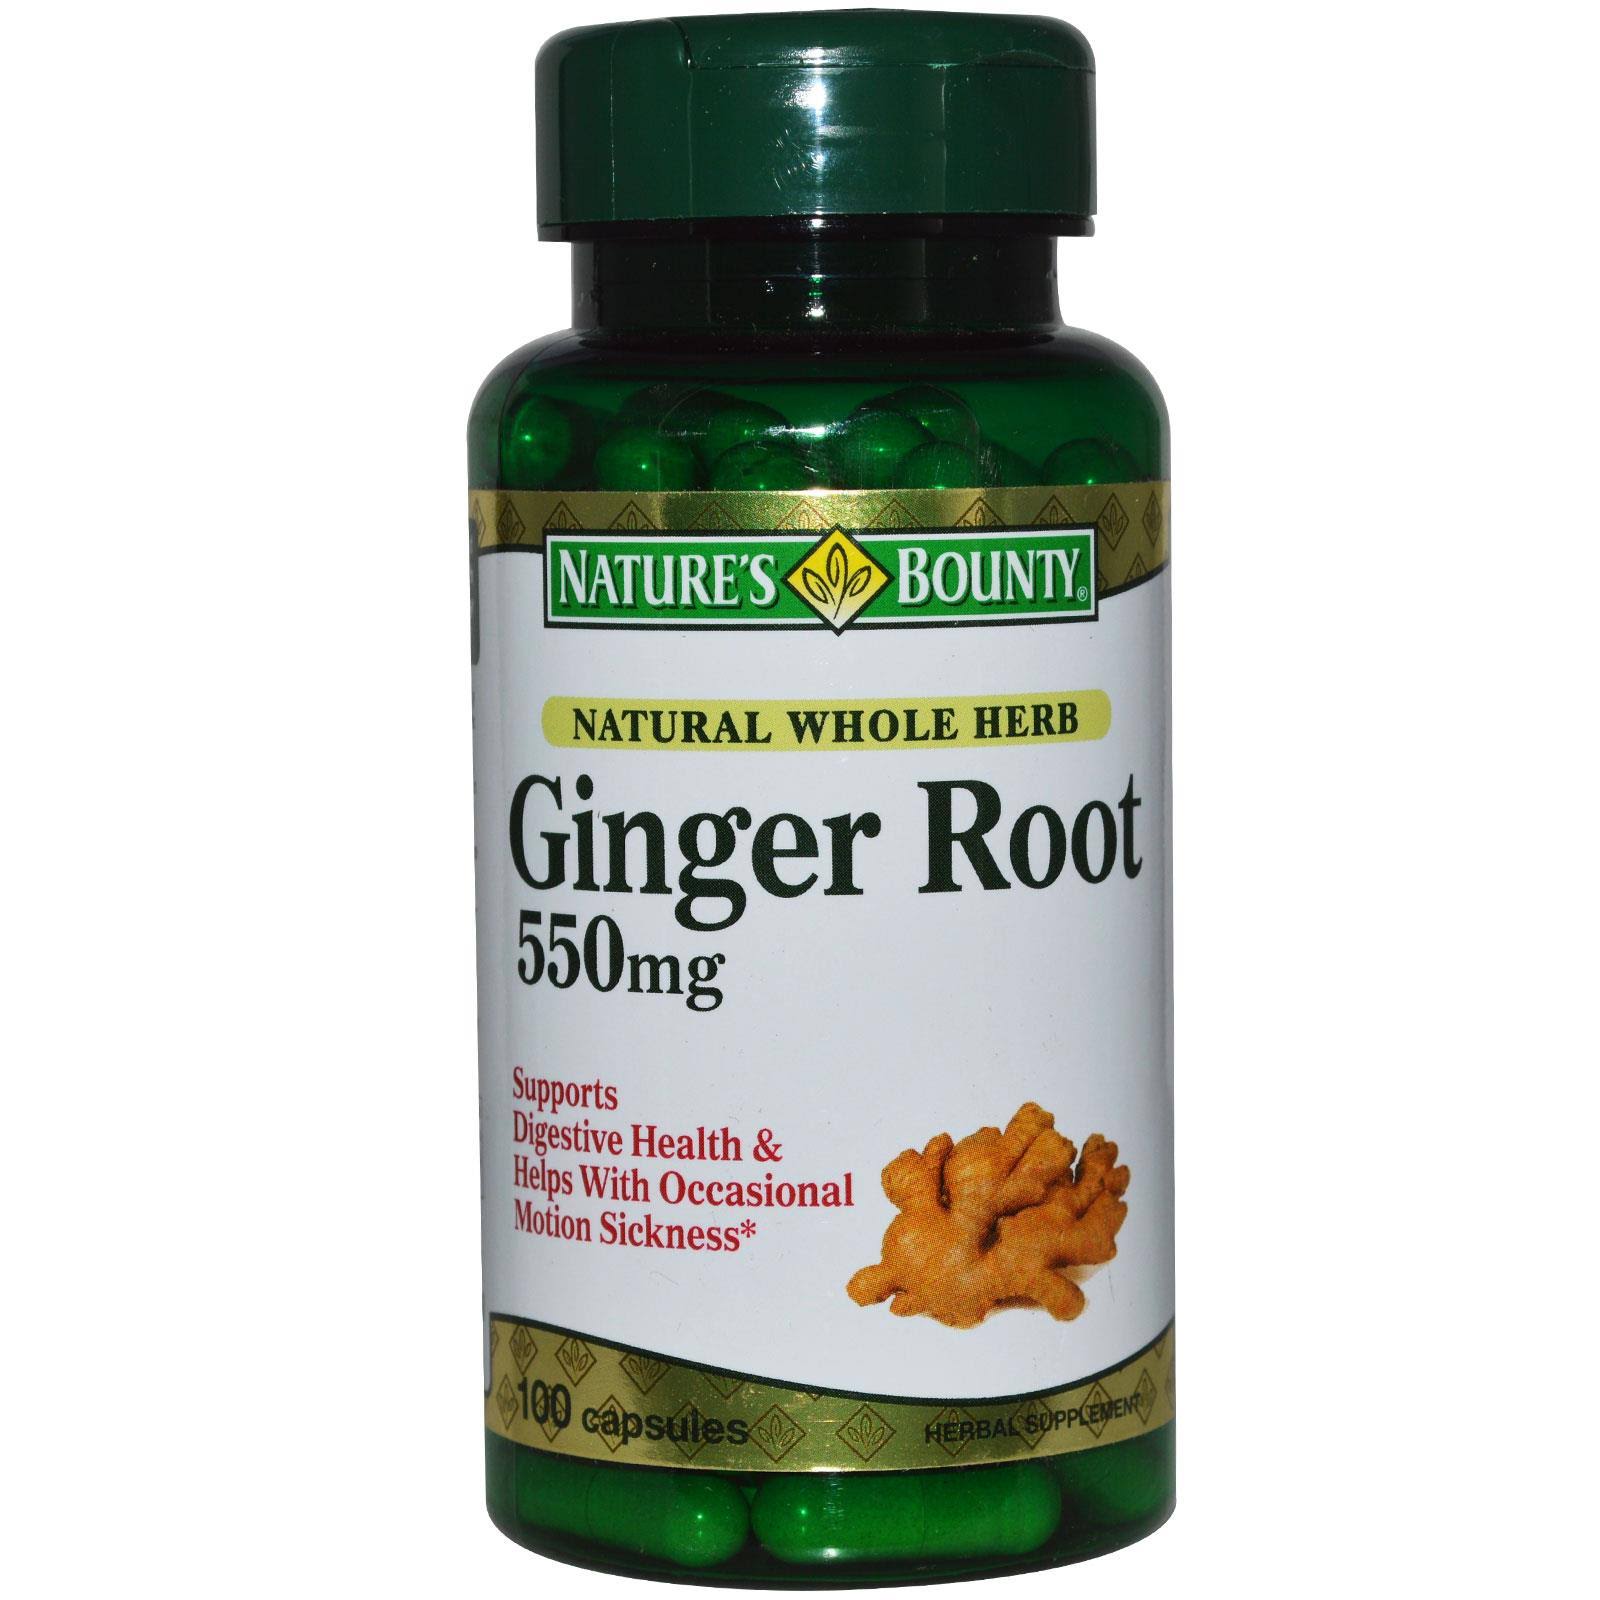 Nature's Bounty Ginger Root Supplement - 100 Capsules